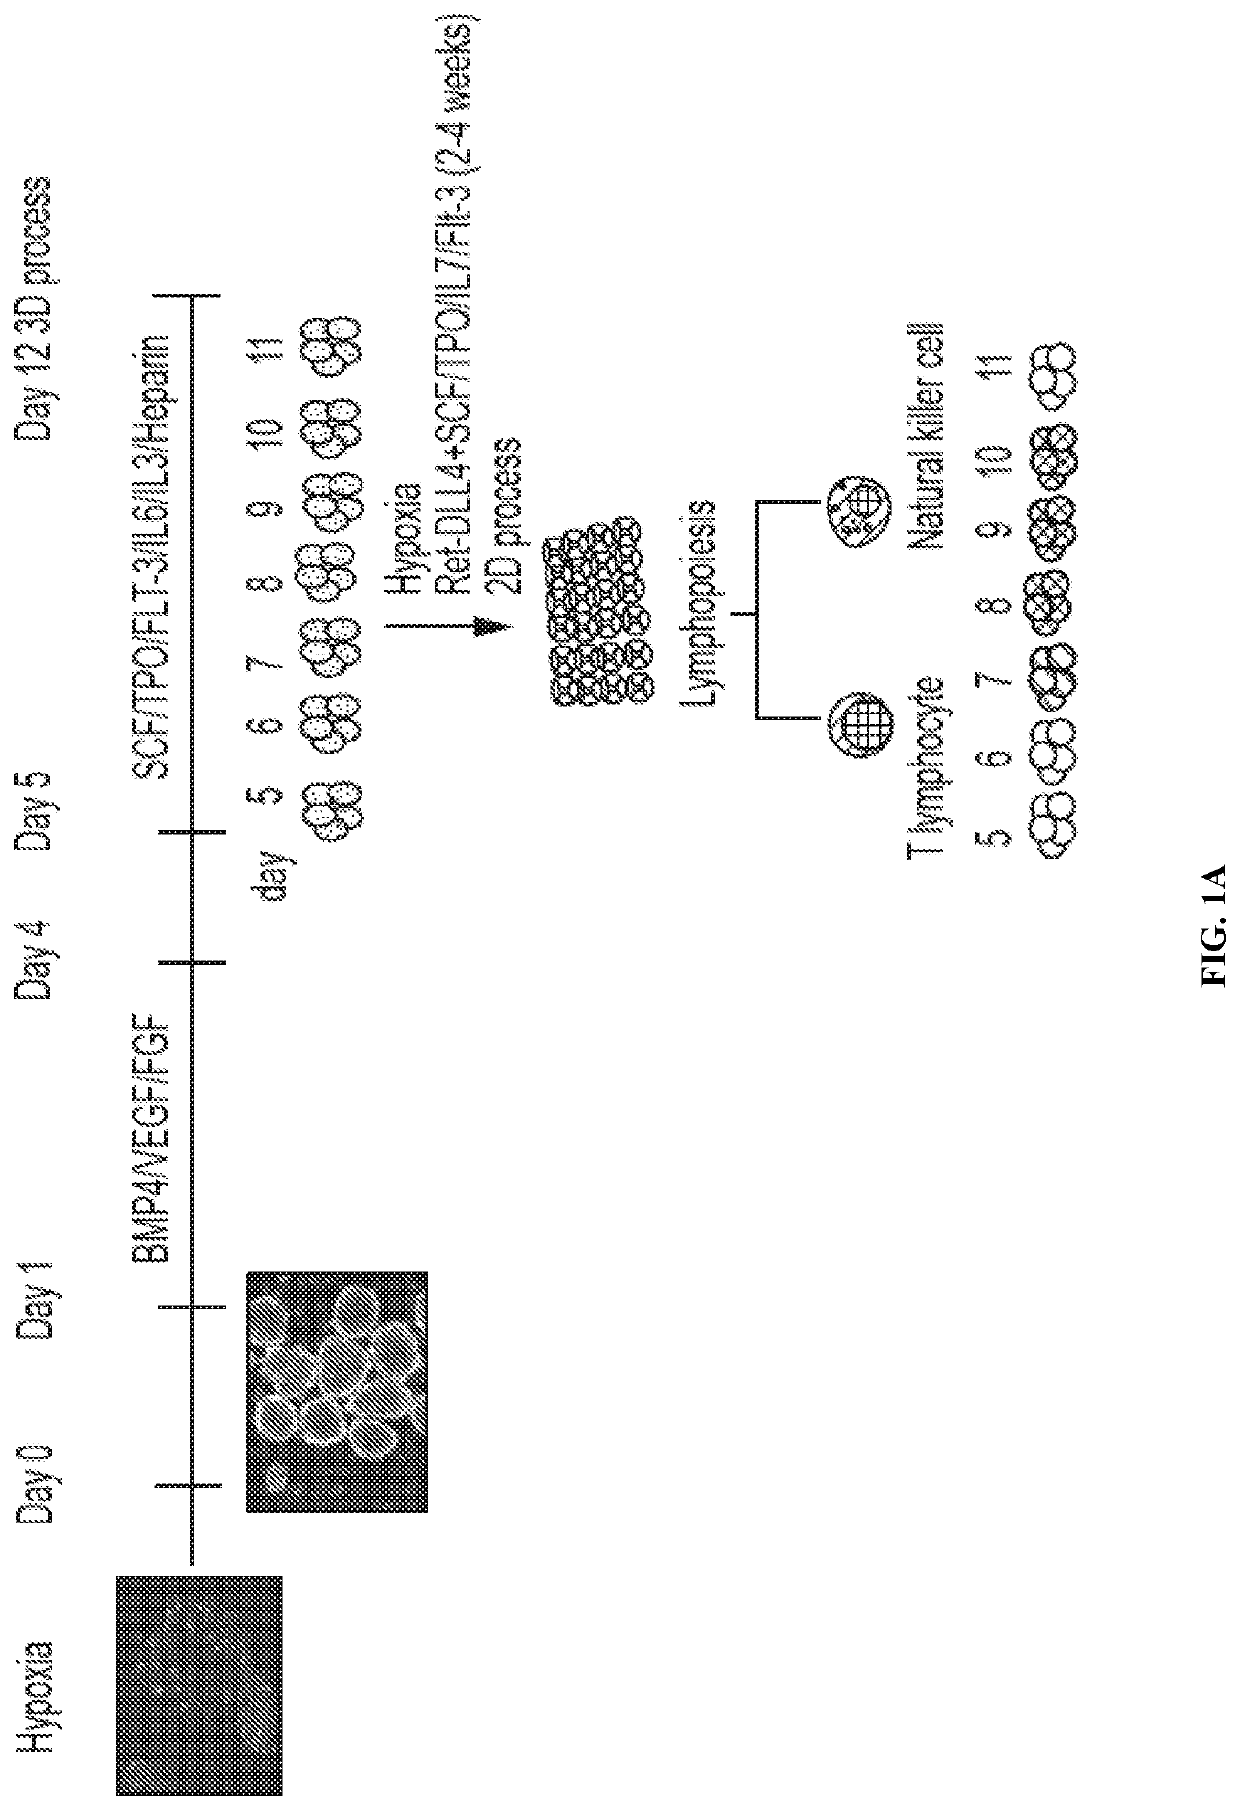 Methods for directed differentiation of pluripotent stem cells to HLA homozygous immune cells